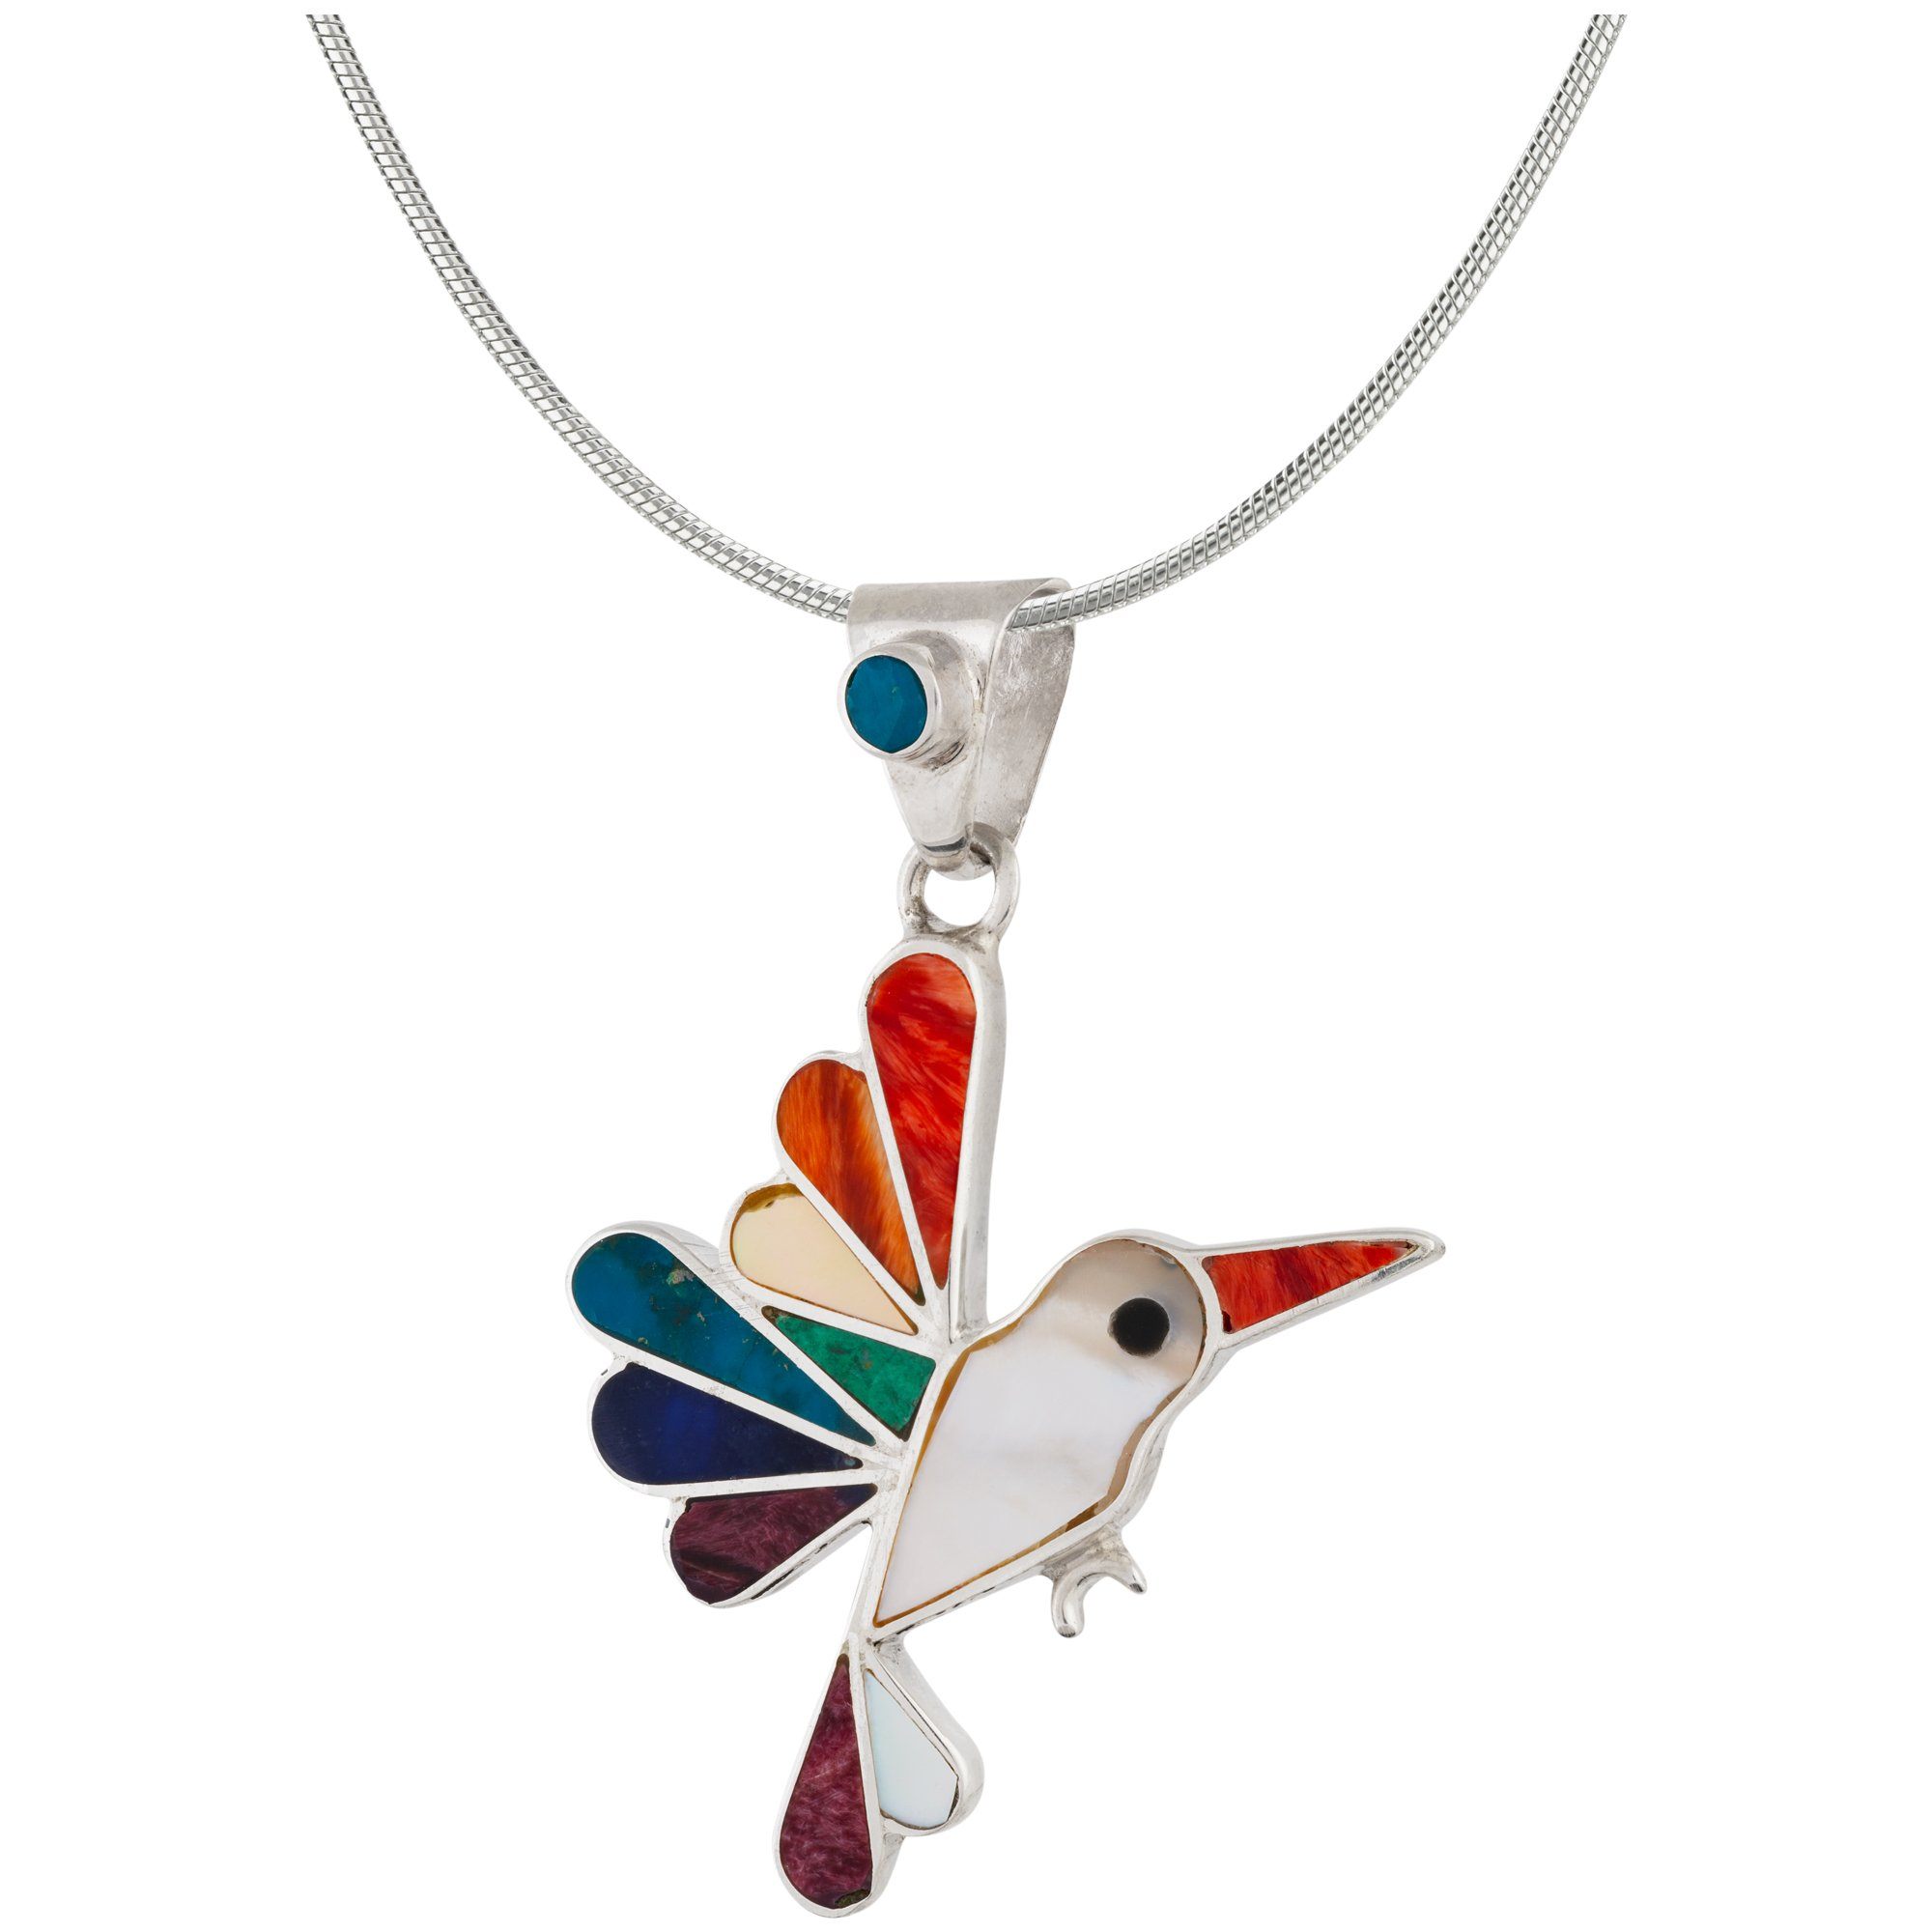 Earth's Splendor Gemstone & Sterling Necklace - Hummingbird - With Sterling Cable Chain